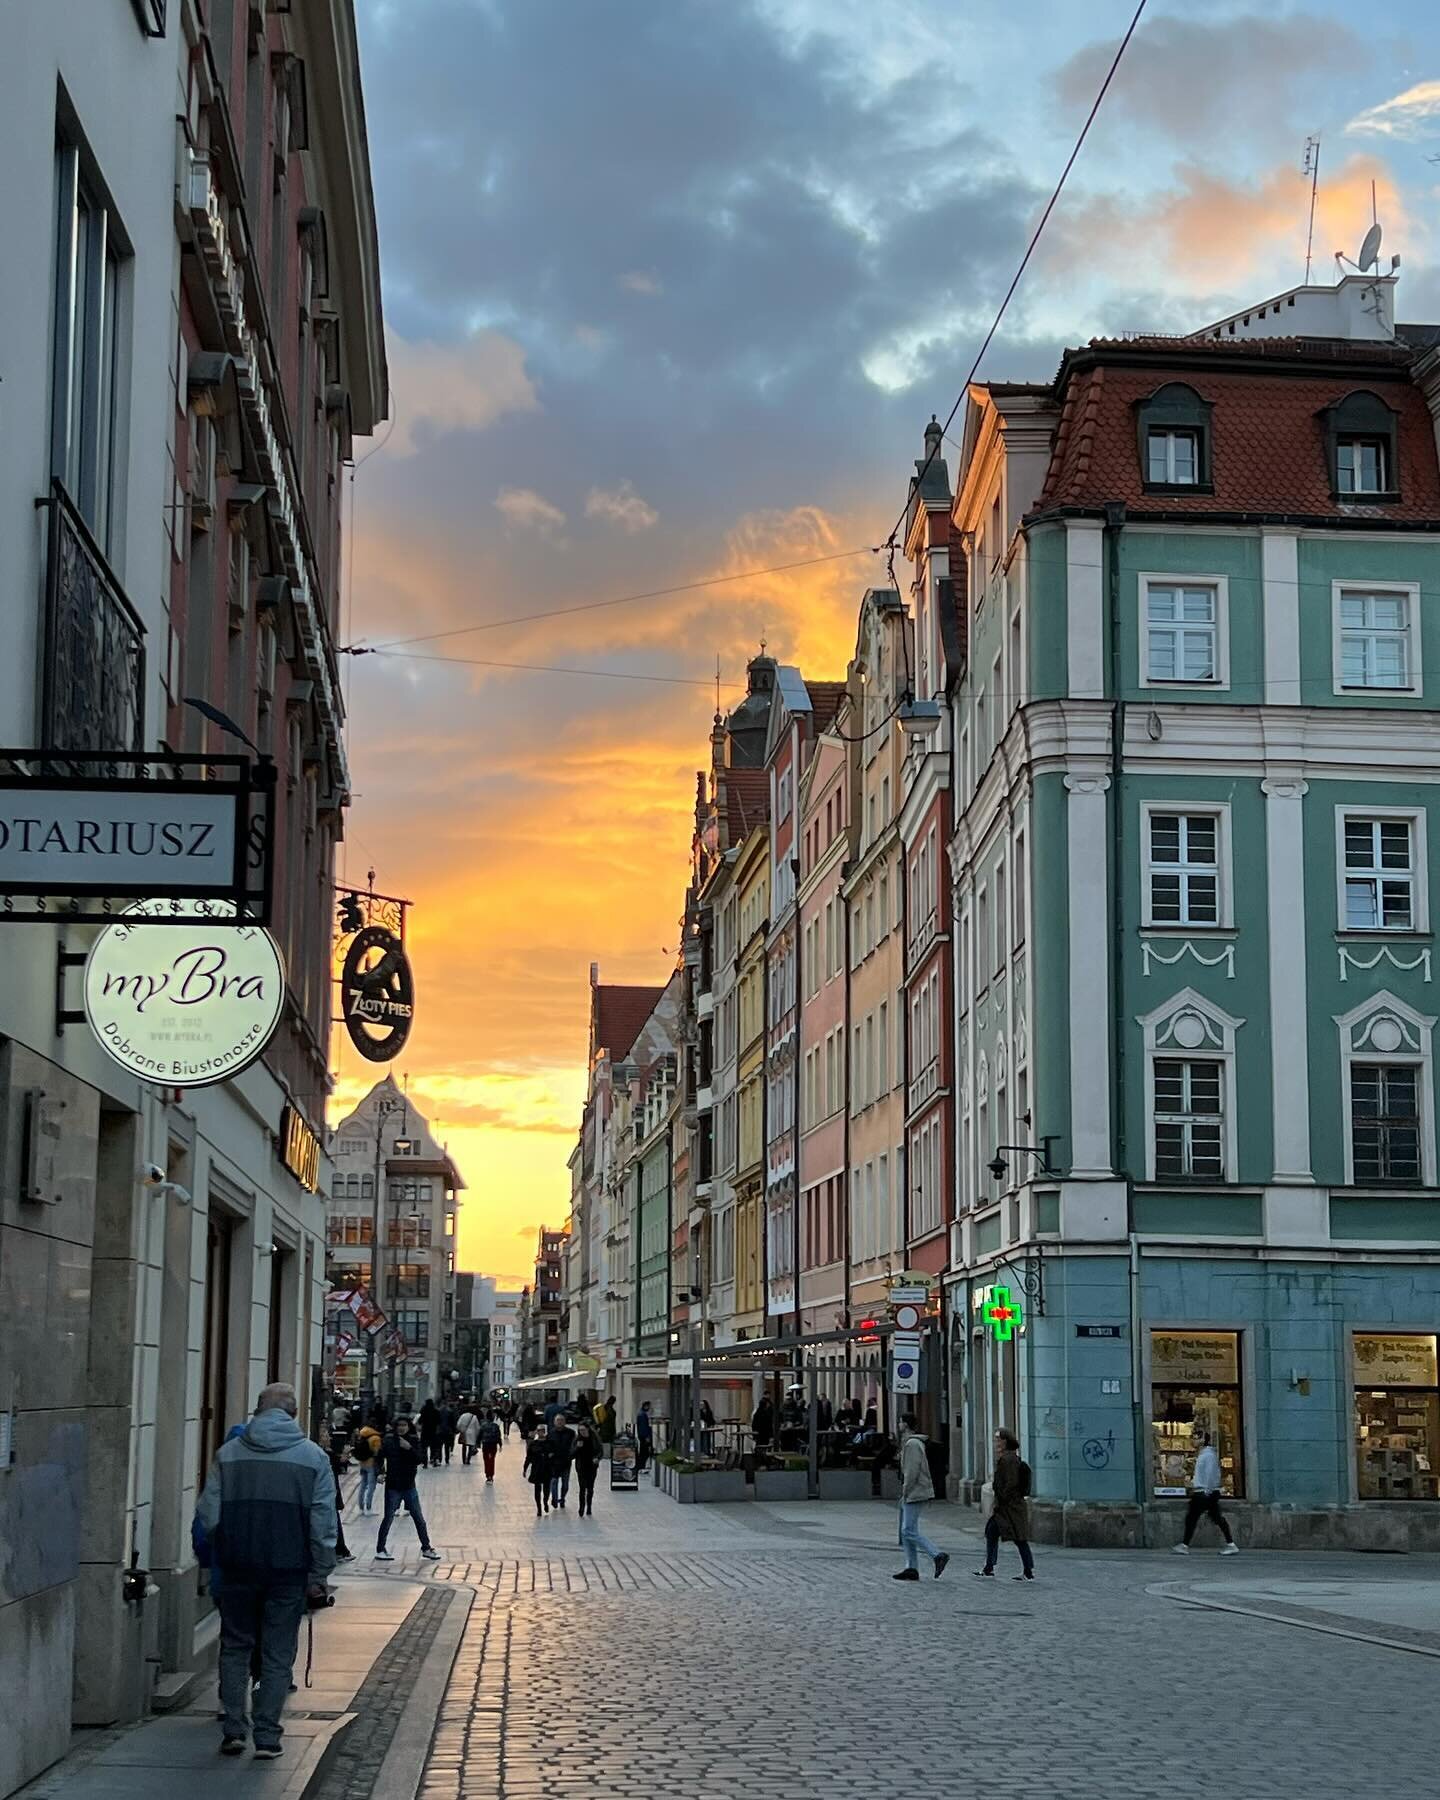 Wrocław, Poland has a very impressive market square - reminiscent of Copenhagen to me, with the vibrantly coloured buildings. Great sunset, quite warm, and strolling on the a great duck dinner. #wroclaw #poland